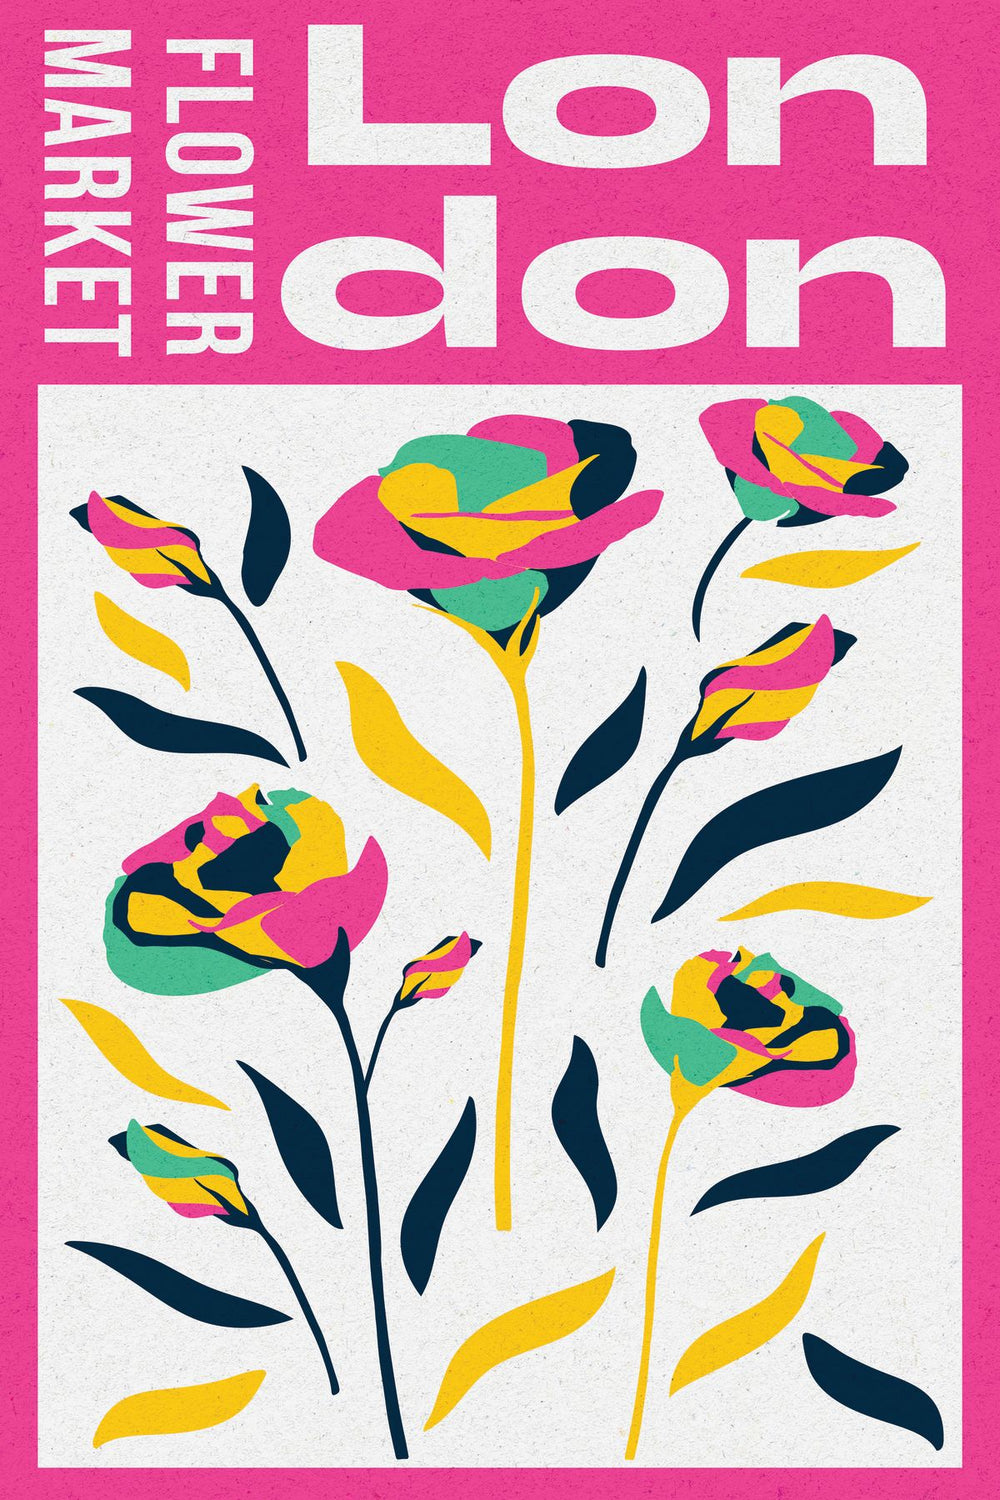 London Abstract Flower Market Poster